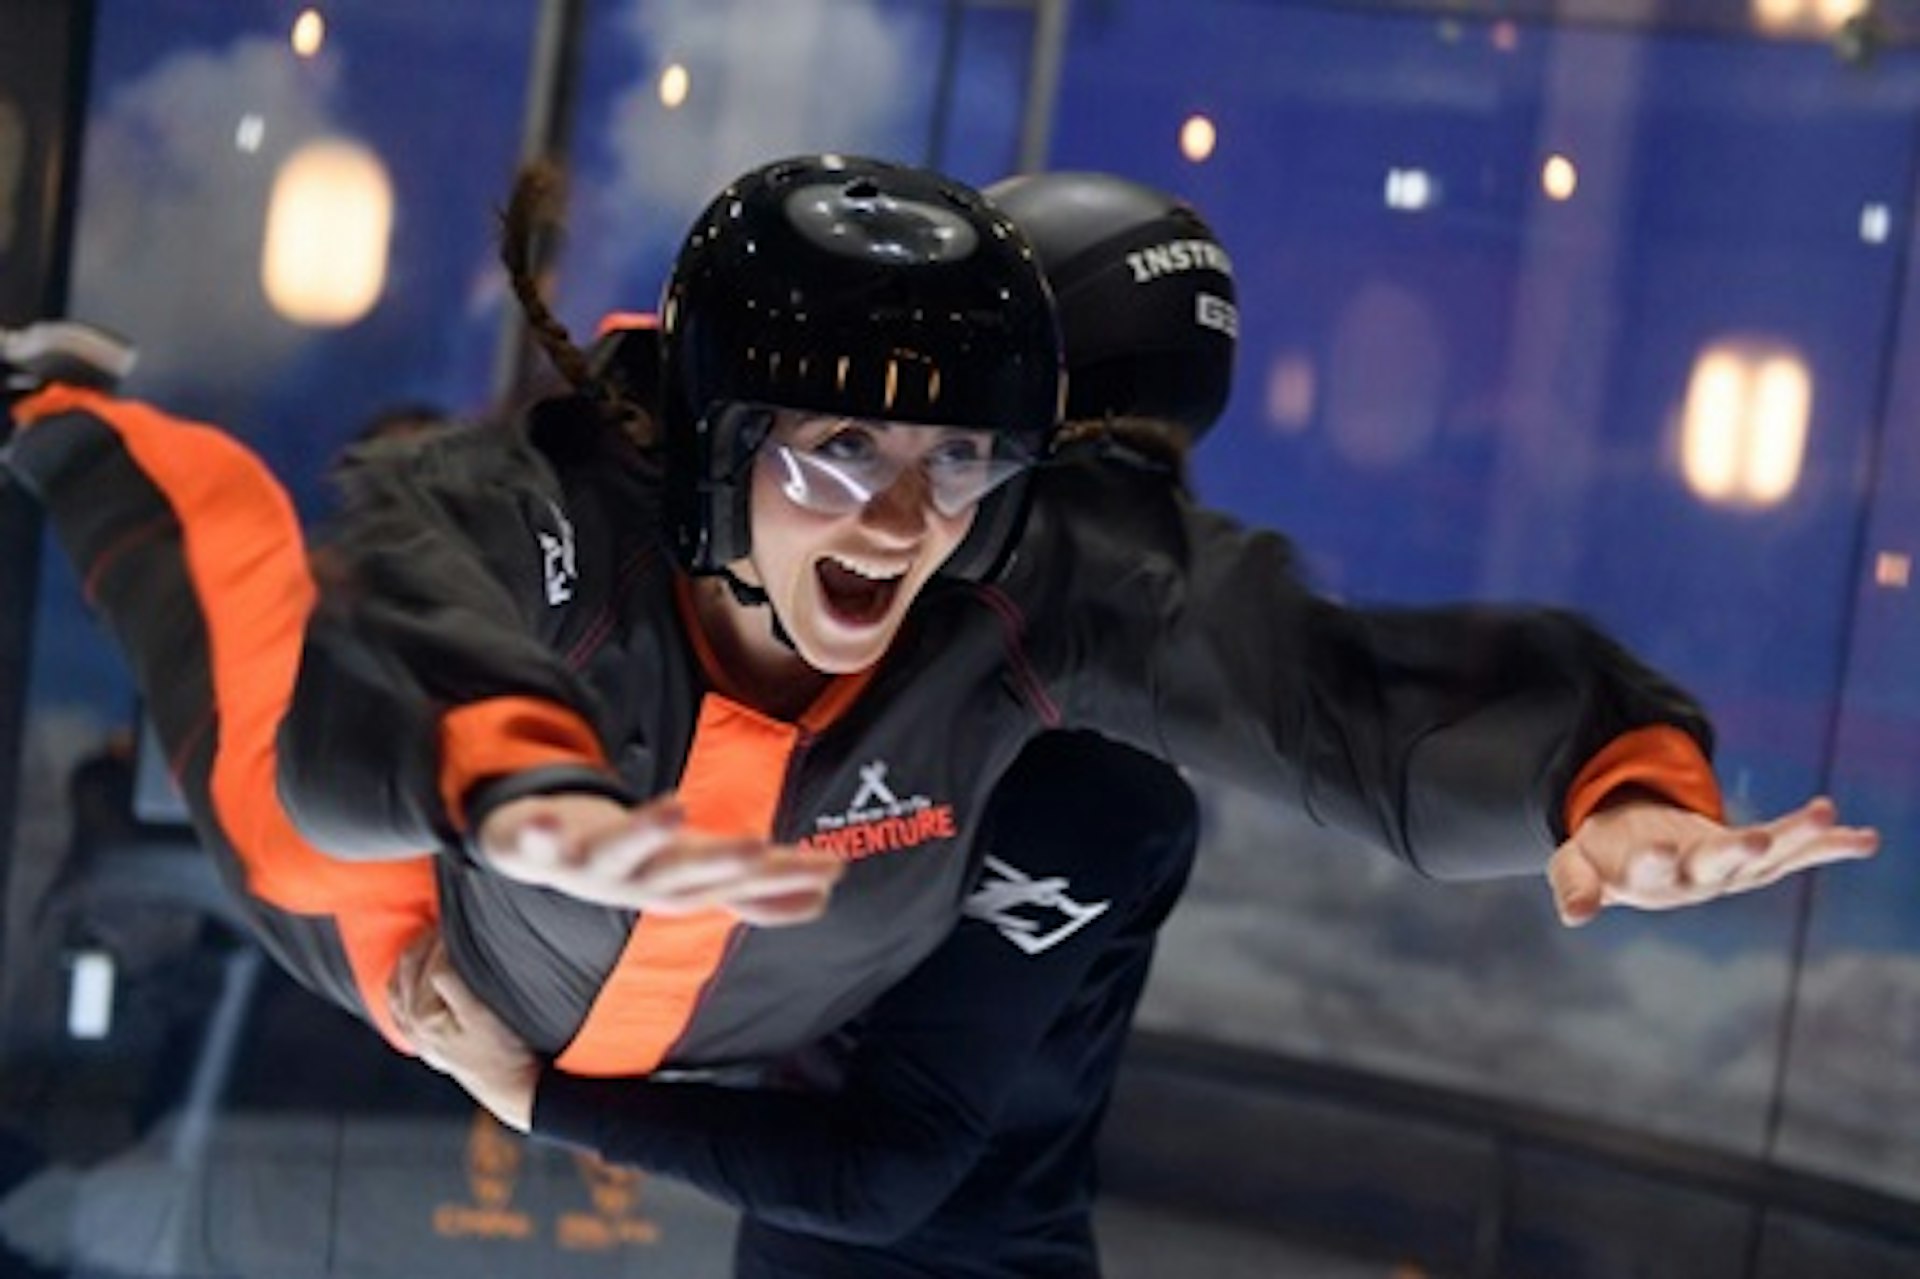 iFly Indoor Skydiving and Archery at The Bear Grylls Adventure 1